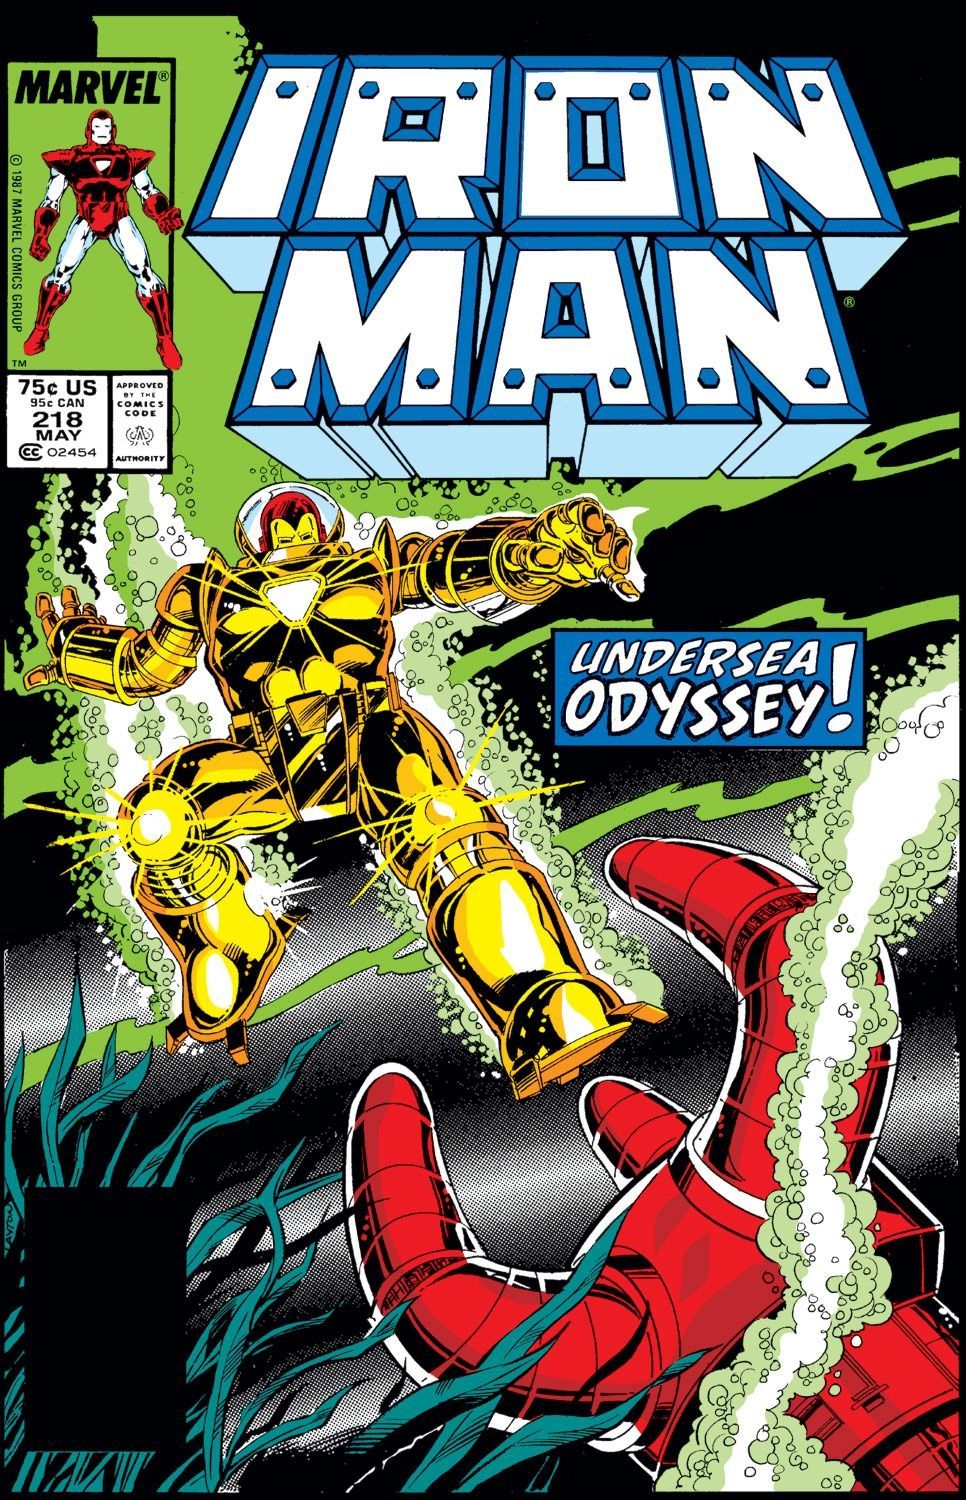 Iron Man #218 - Deep Trouble! released by Marvel Comics on May 1, 1987